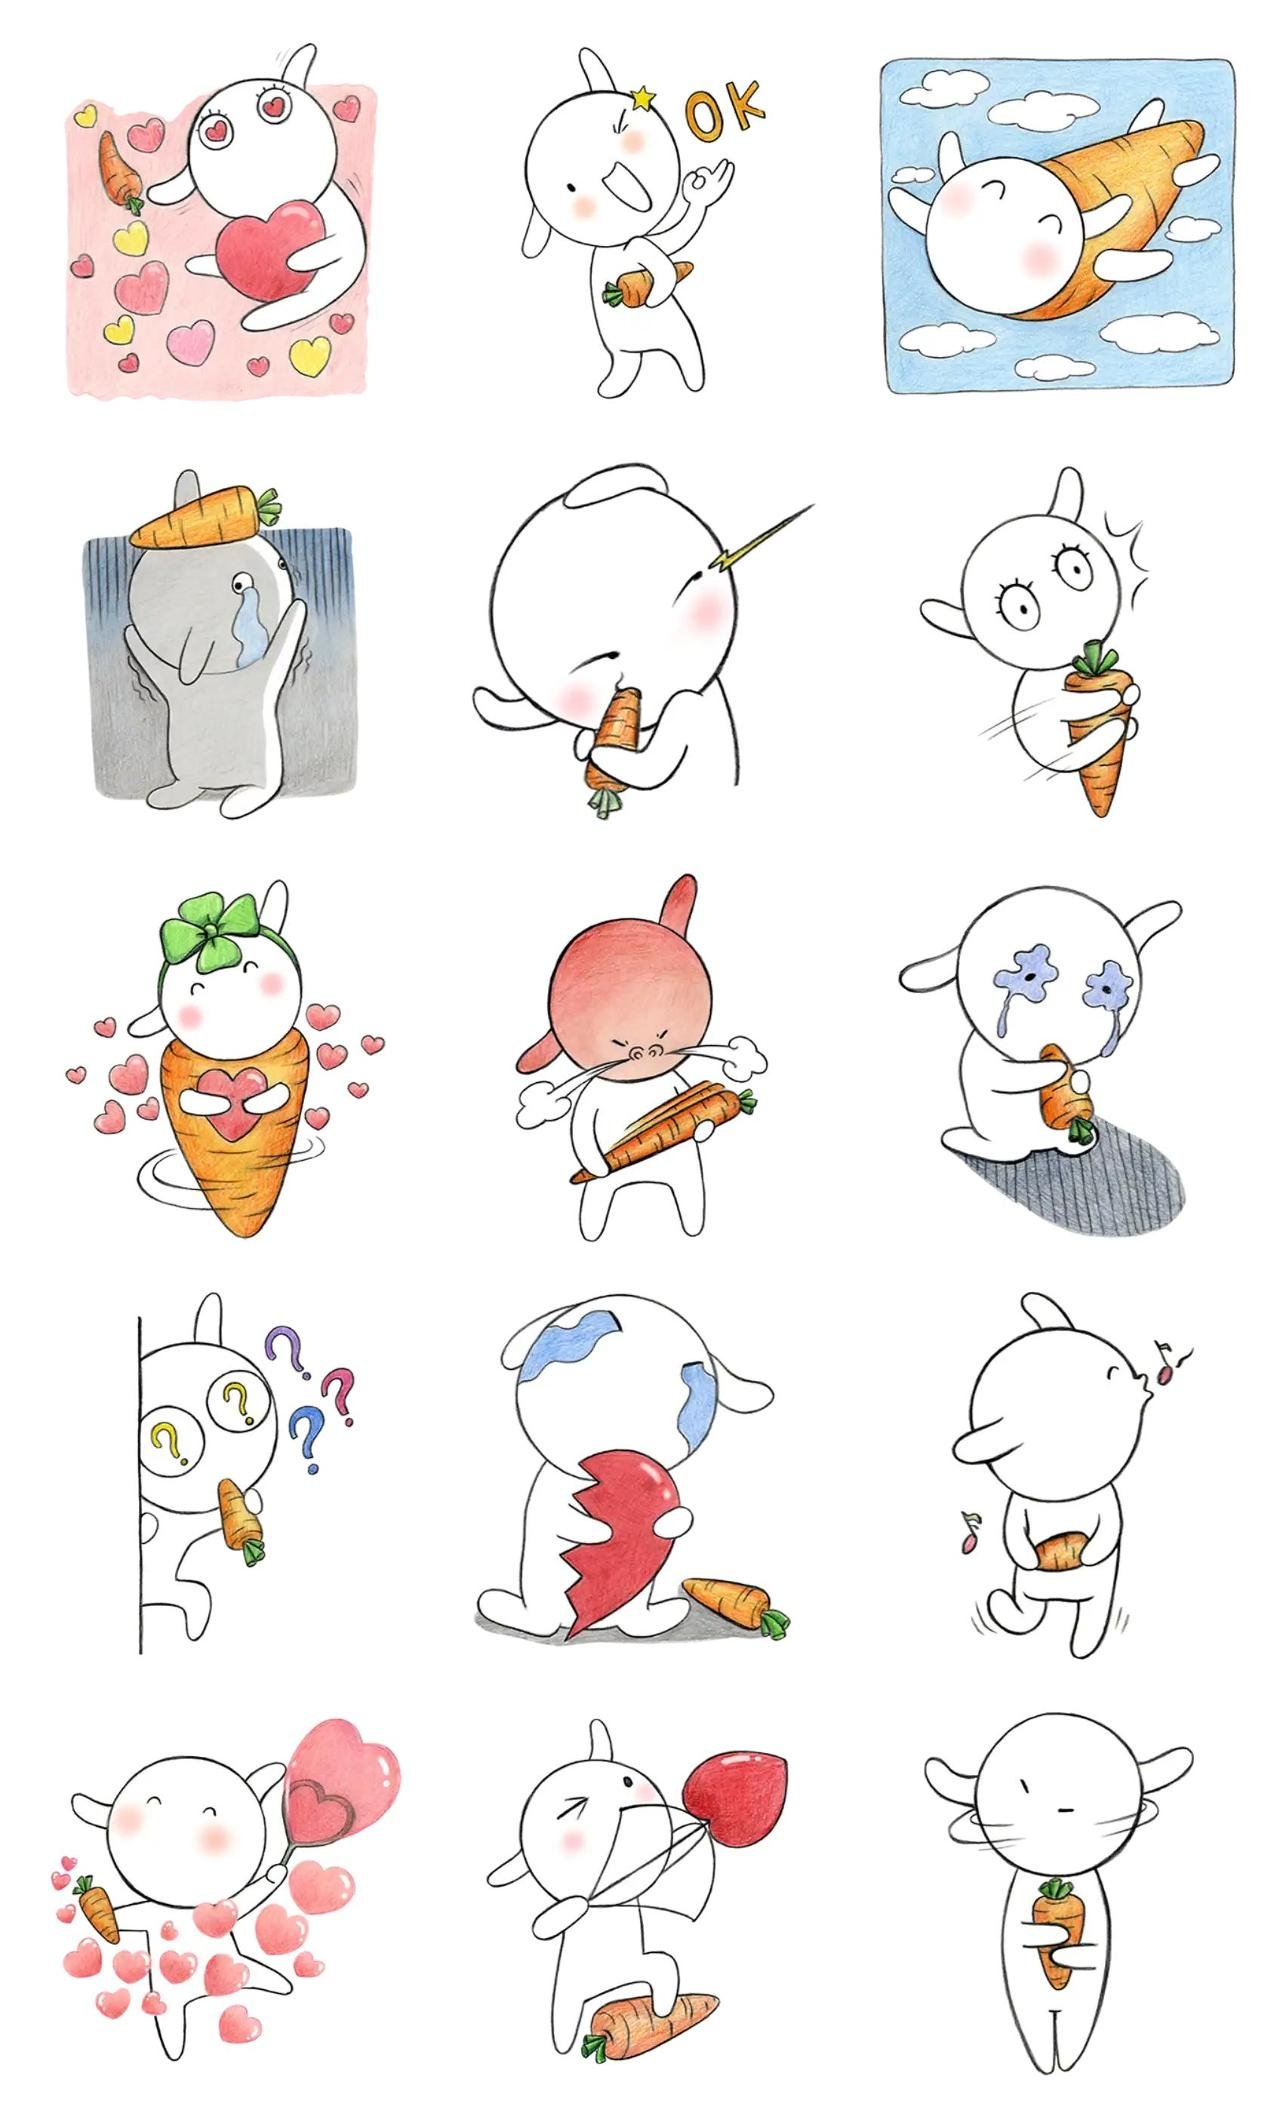 Cute rabbit Animals sticker pack for Whatsapp, Telegram, Signal, and others chatting and message apps